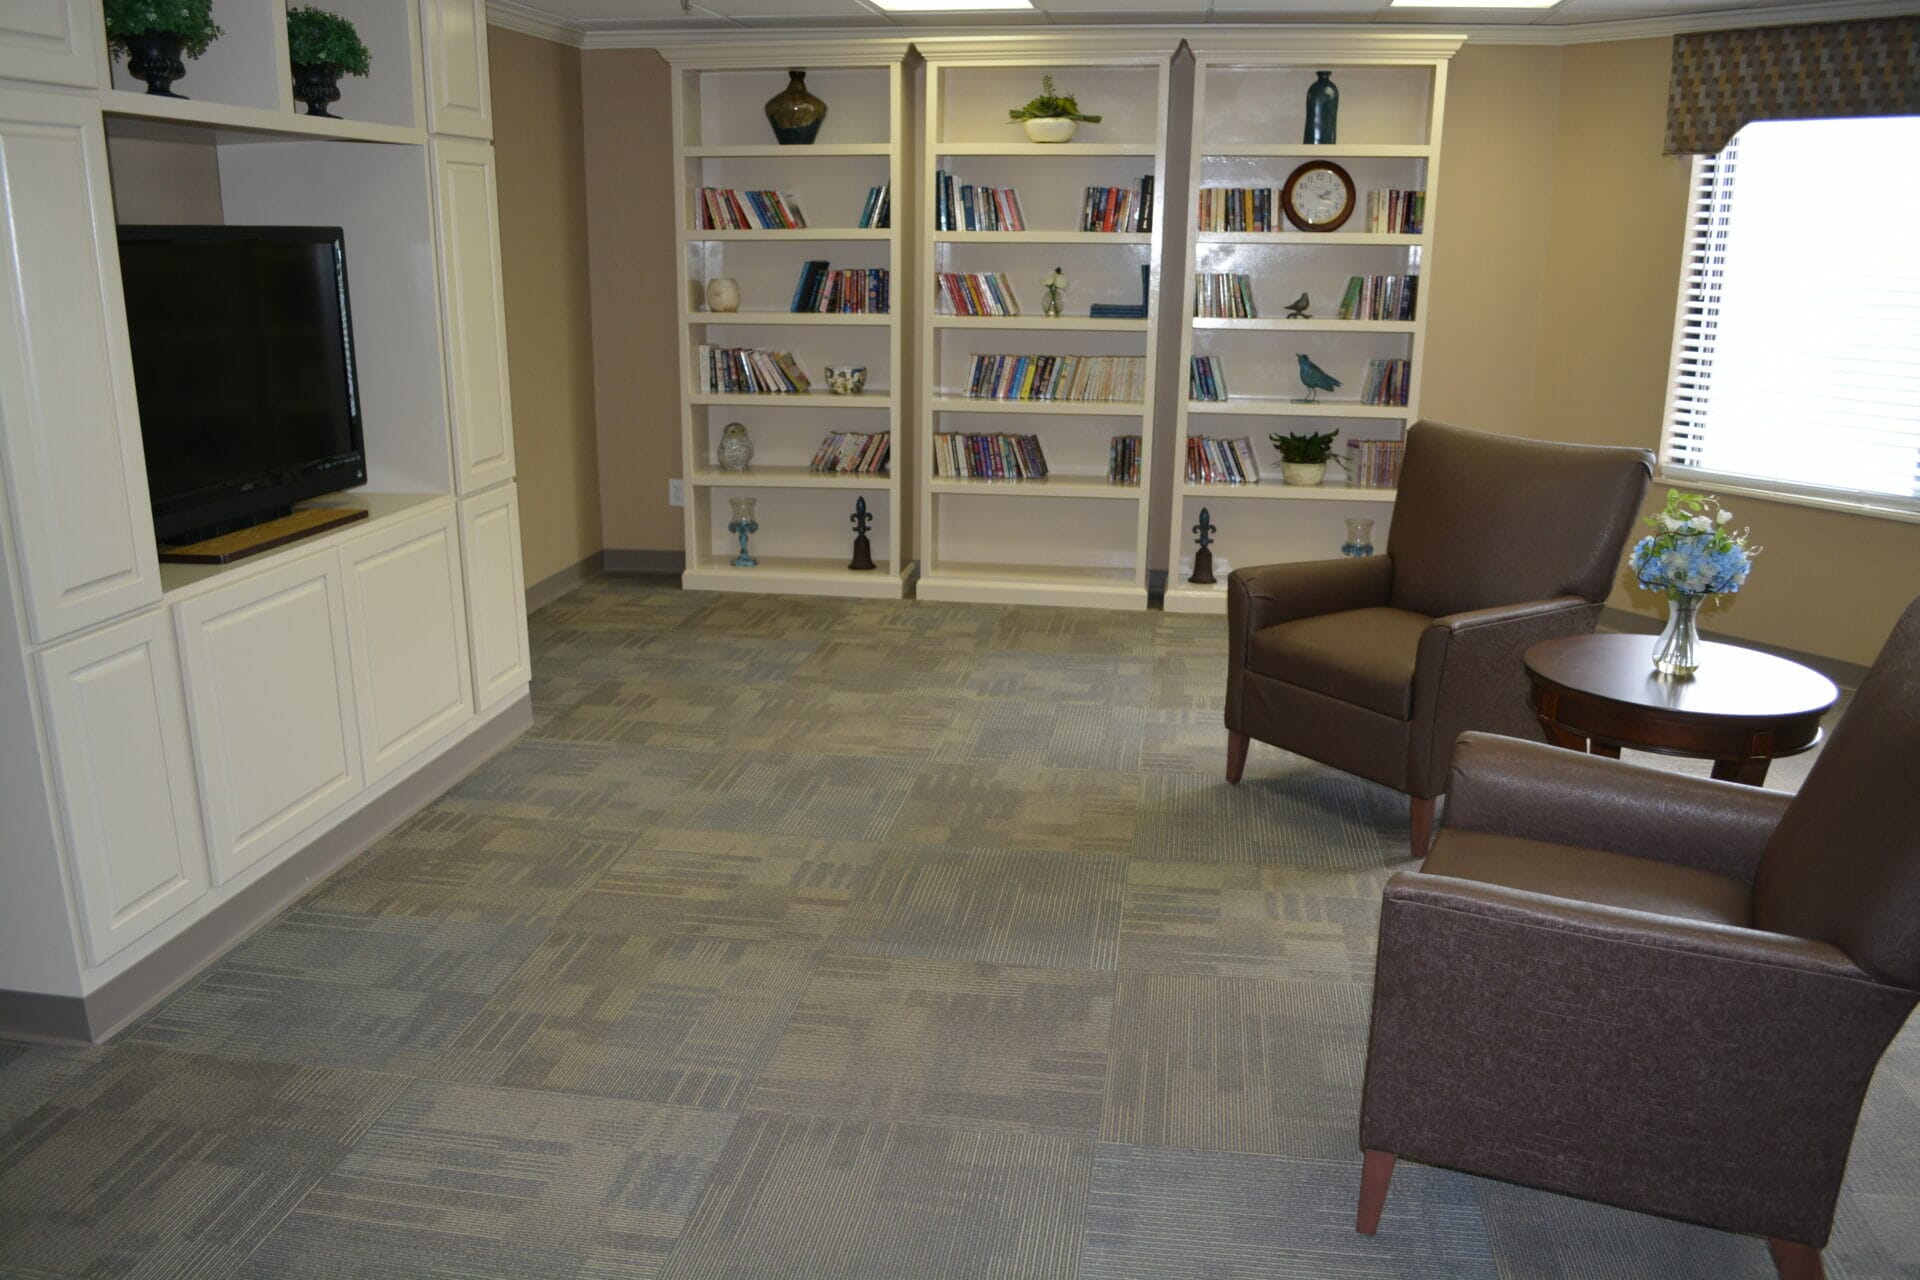 <span  class="uc_style_uc_tiles_grid_image_elementor_uc_items_attribute_title" style="color:#000000;">The library at Bethany Village Assisted Living</span>